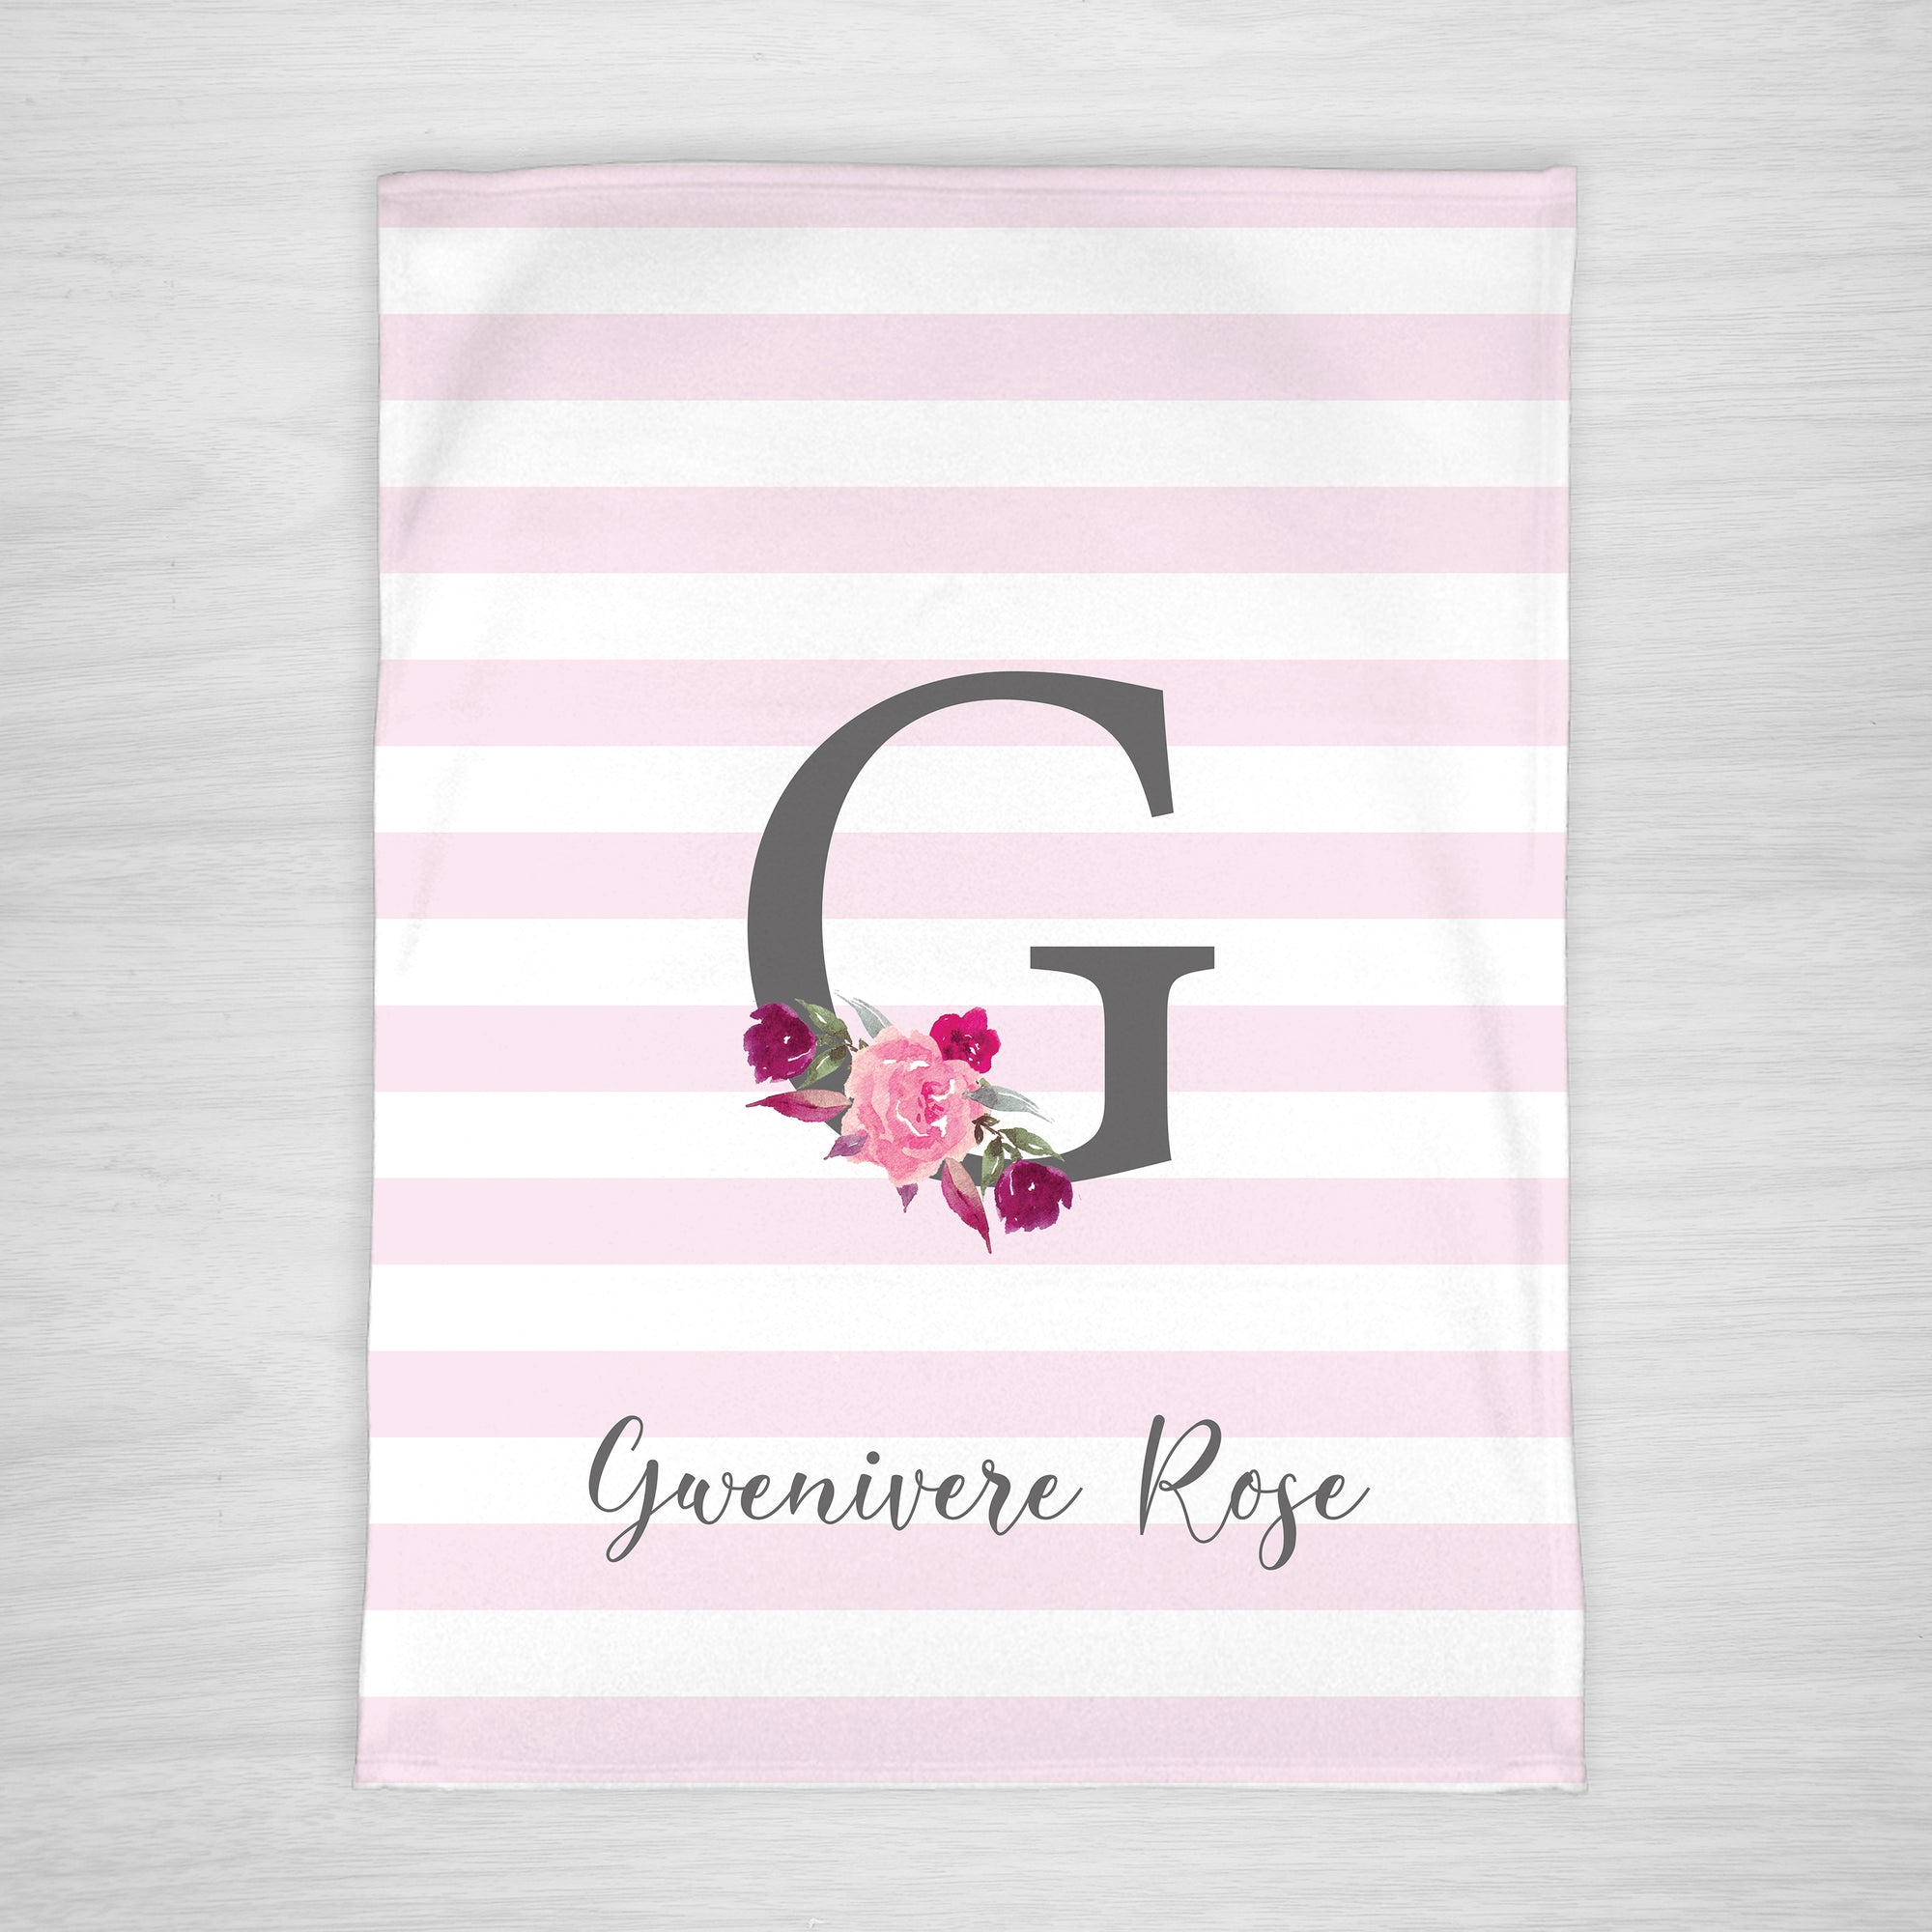 Personalized Girl Baby Blanket, Large Initial with watercolor flowers on pink stipes